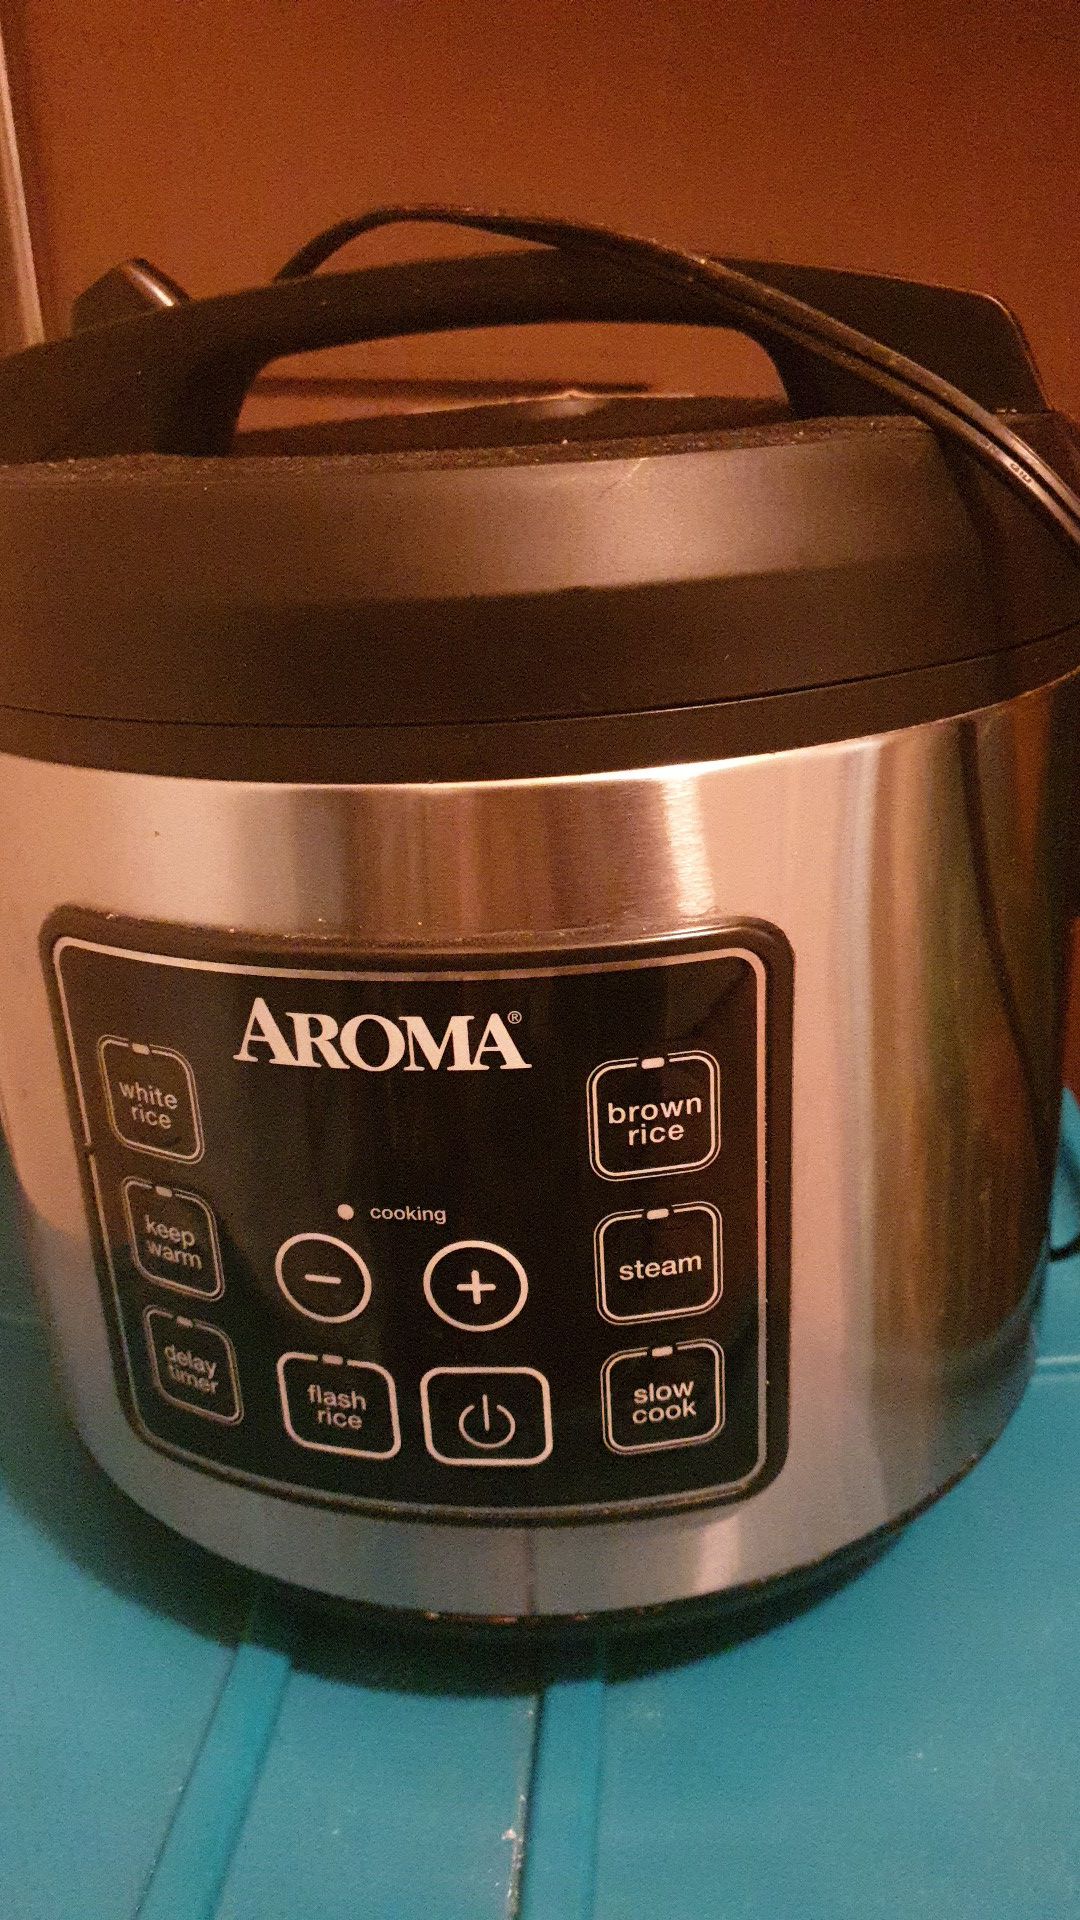 Aroma 6qtz electric cooker.